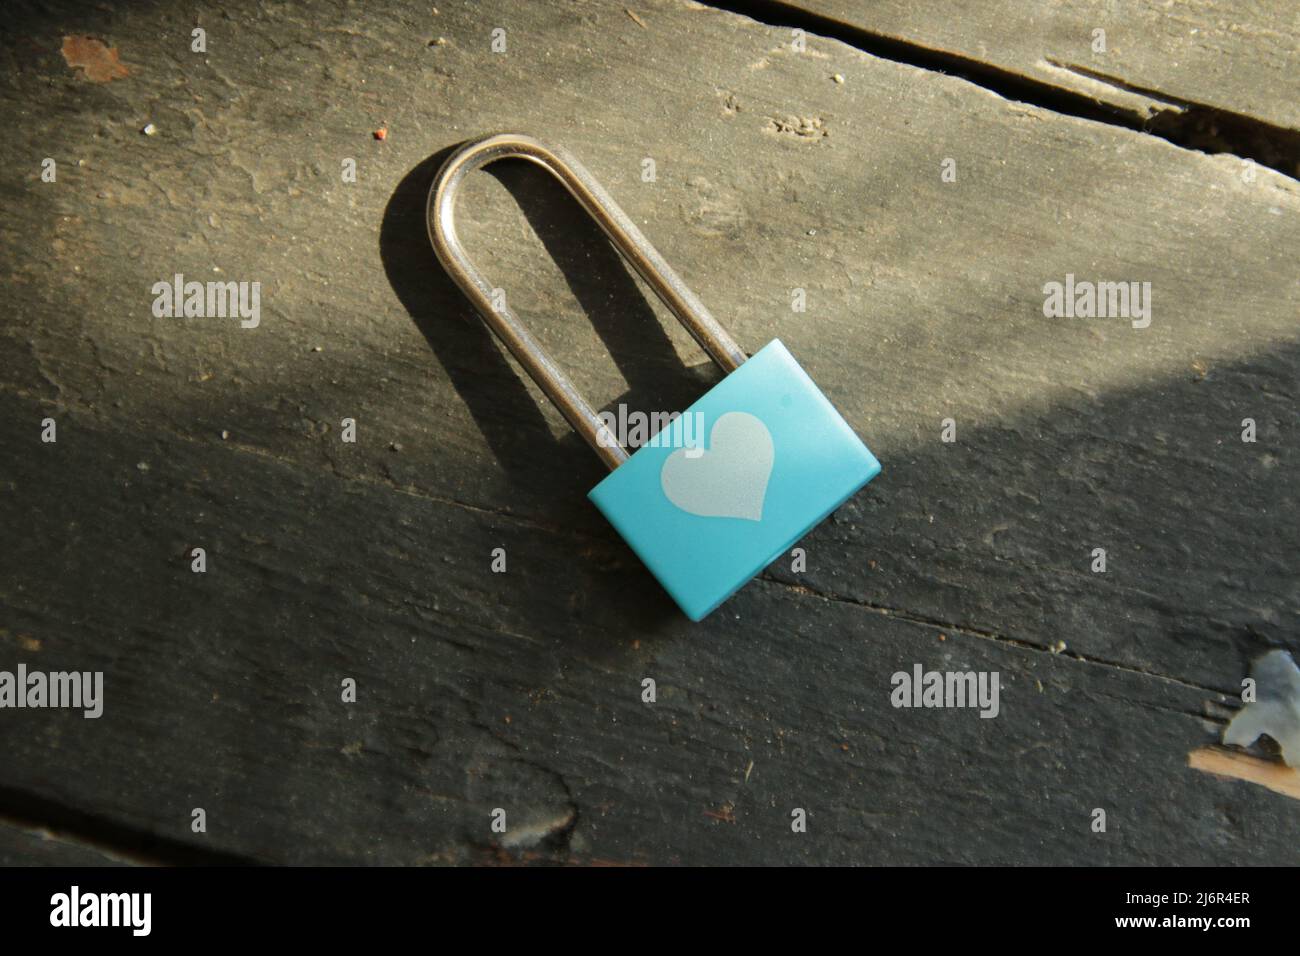 Valentine card. Blue padlock with white heart pattern. Stock Photo